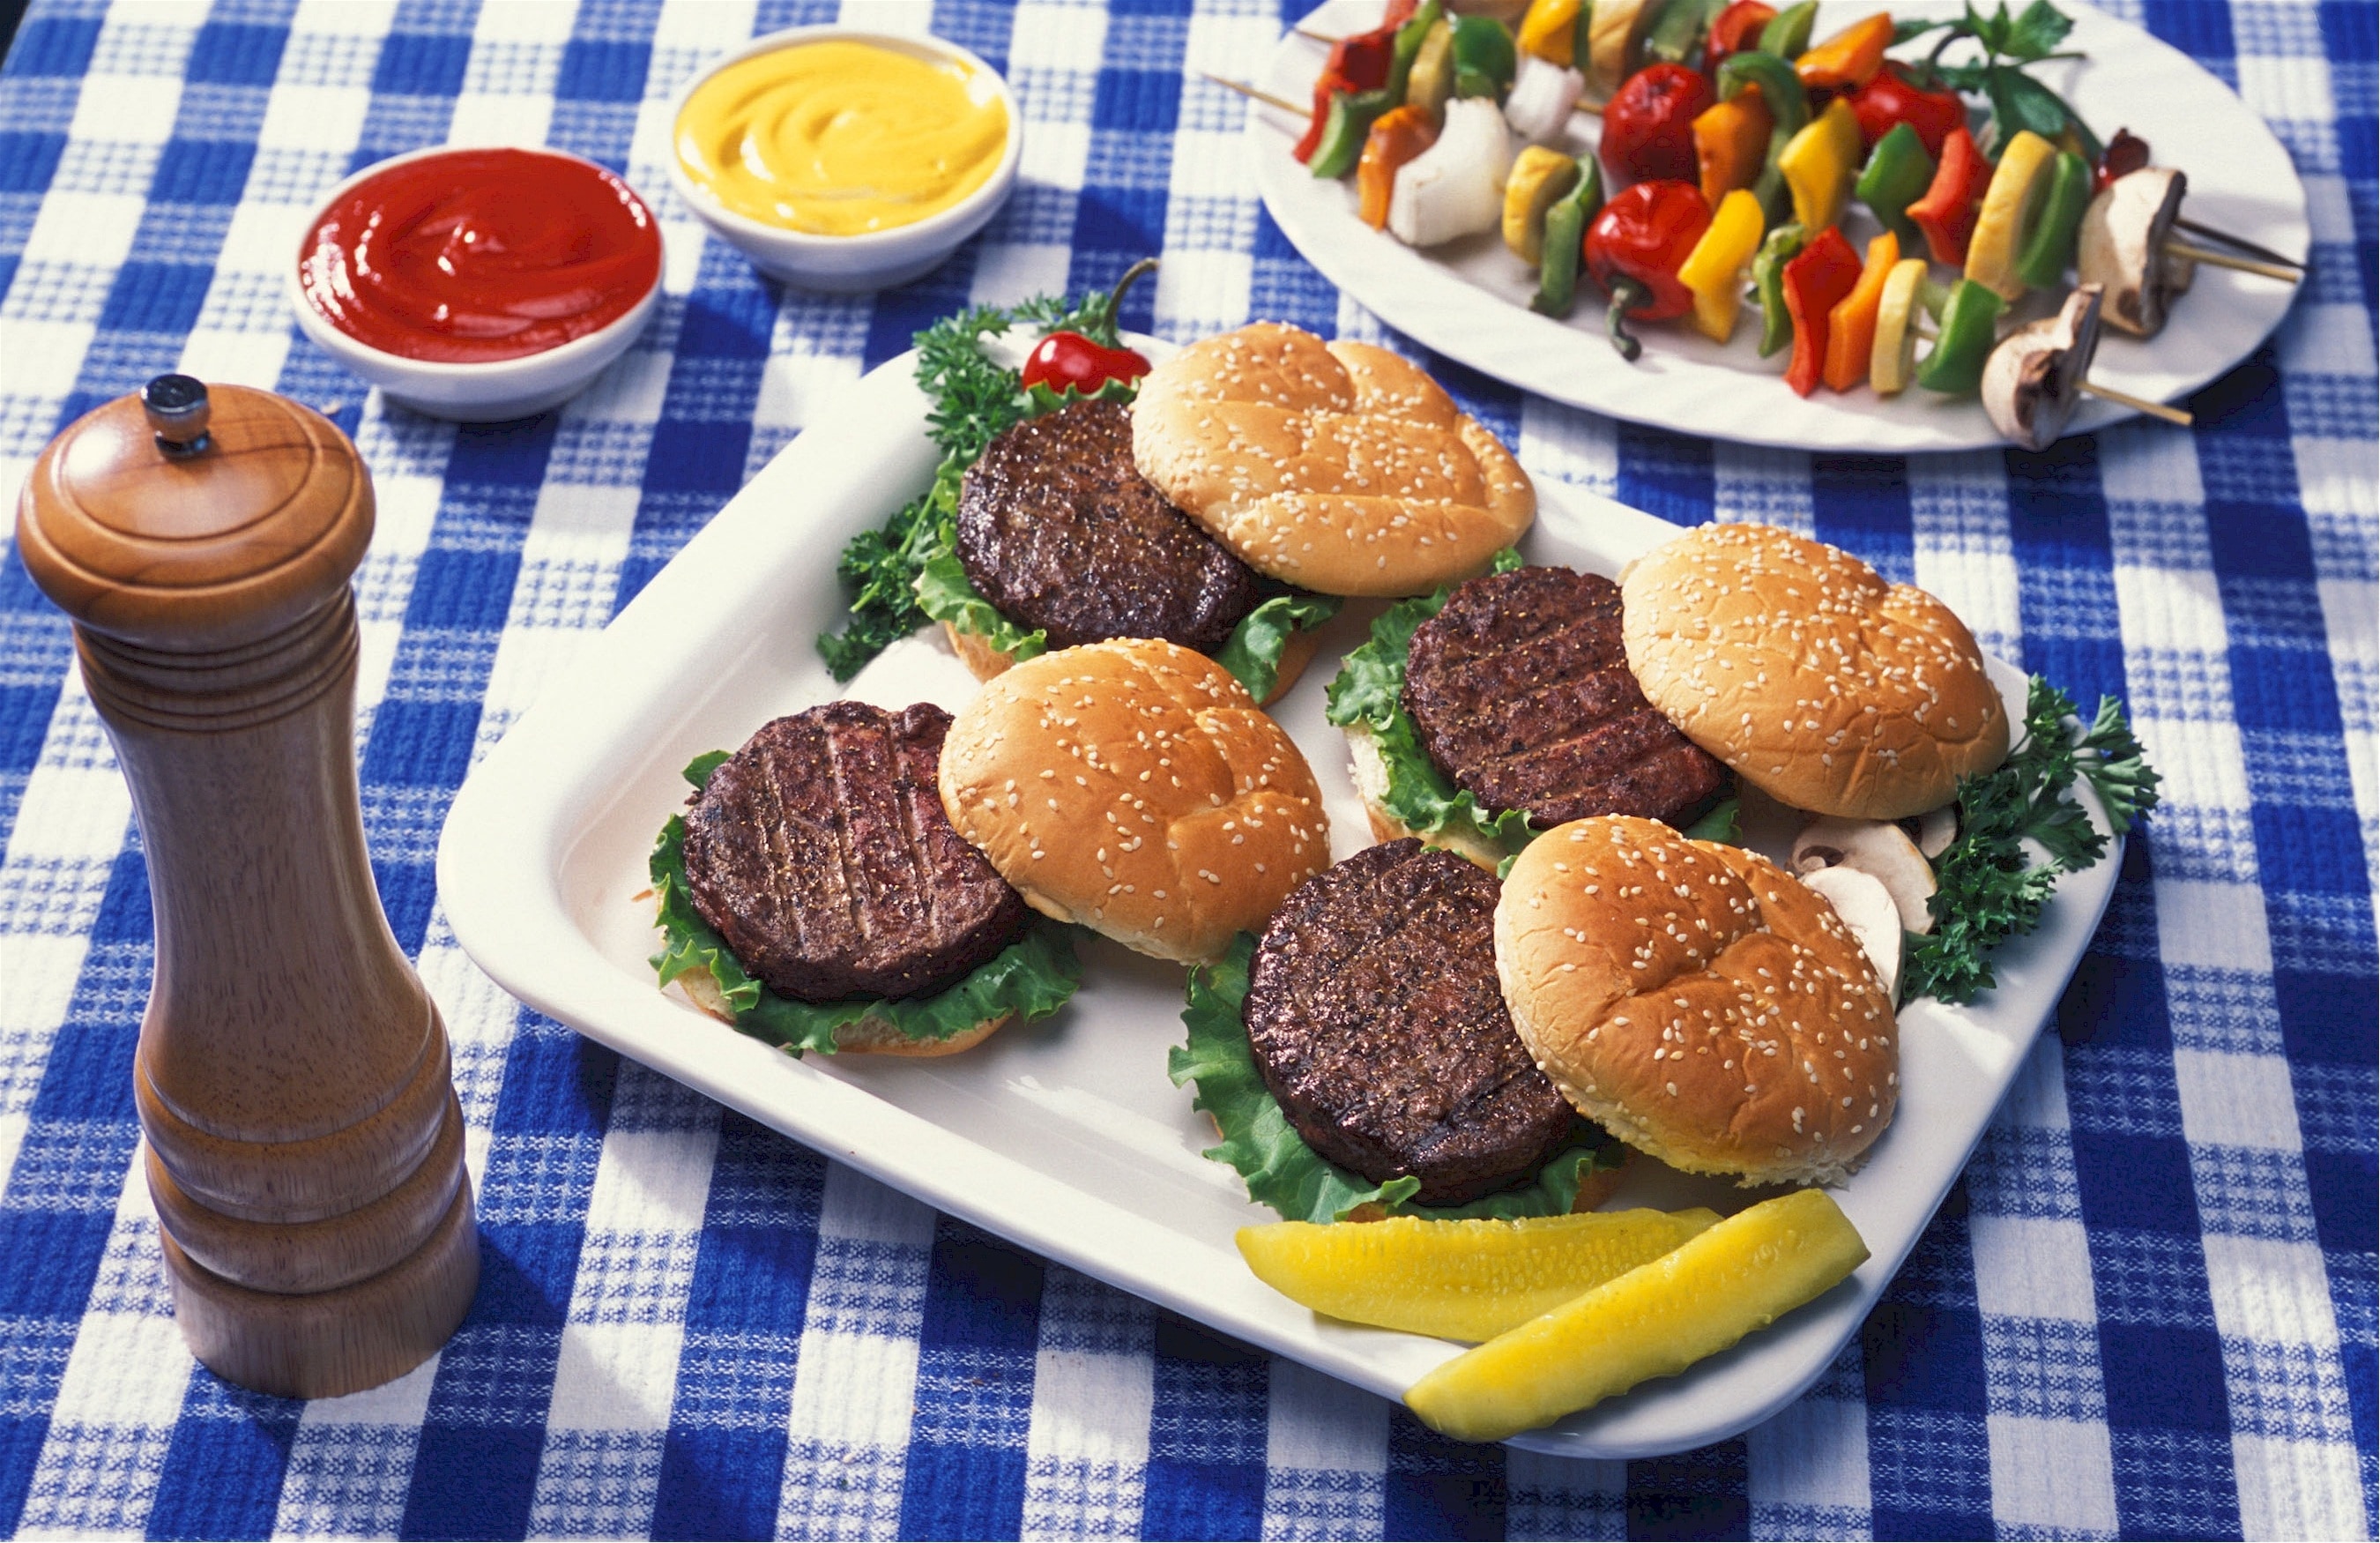 Kabobs, Hamburgers, Meat, Food, Hot, checked pattern, food and drink